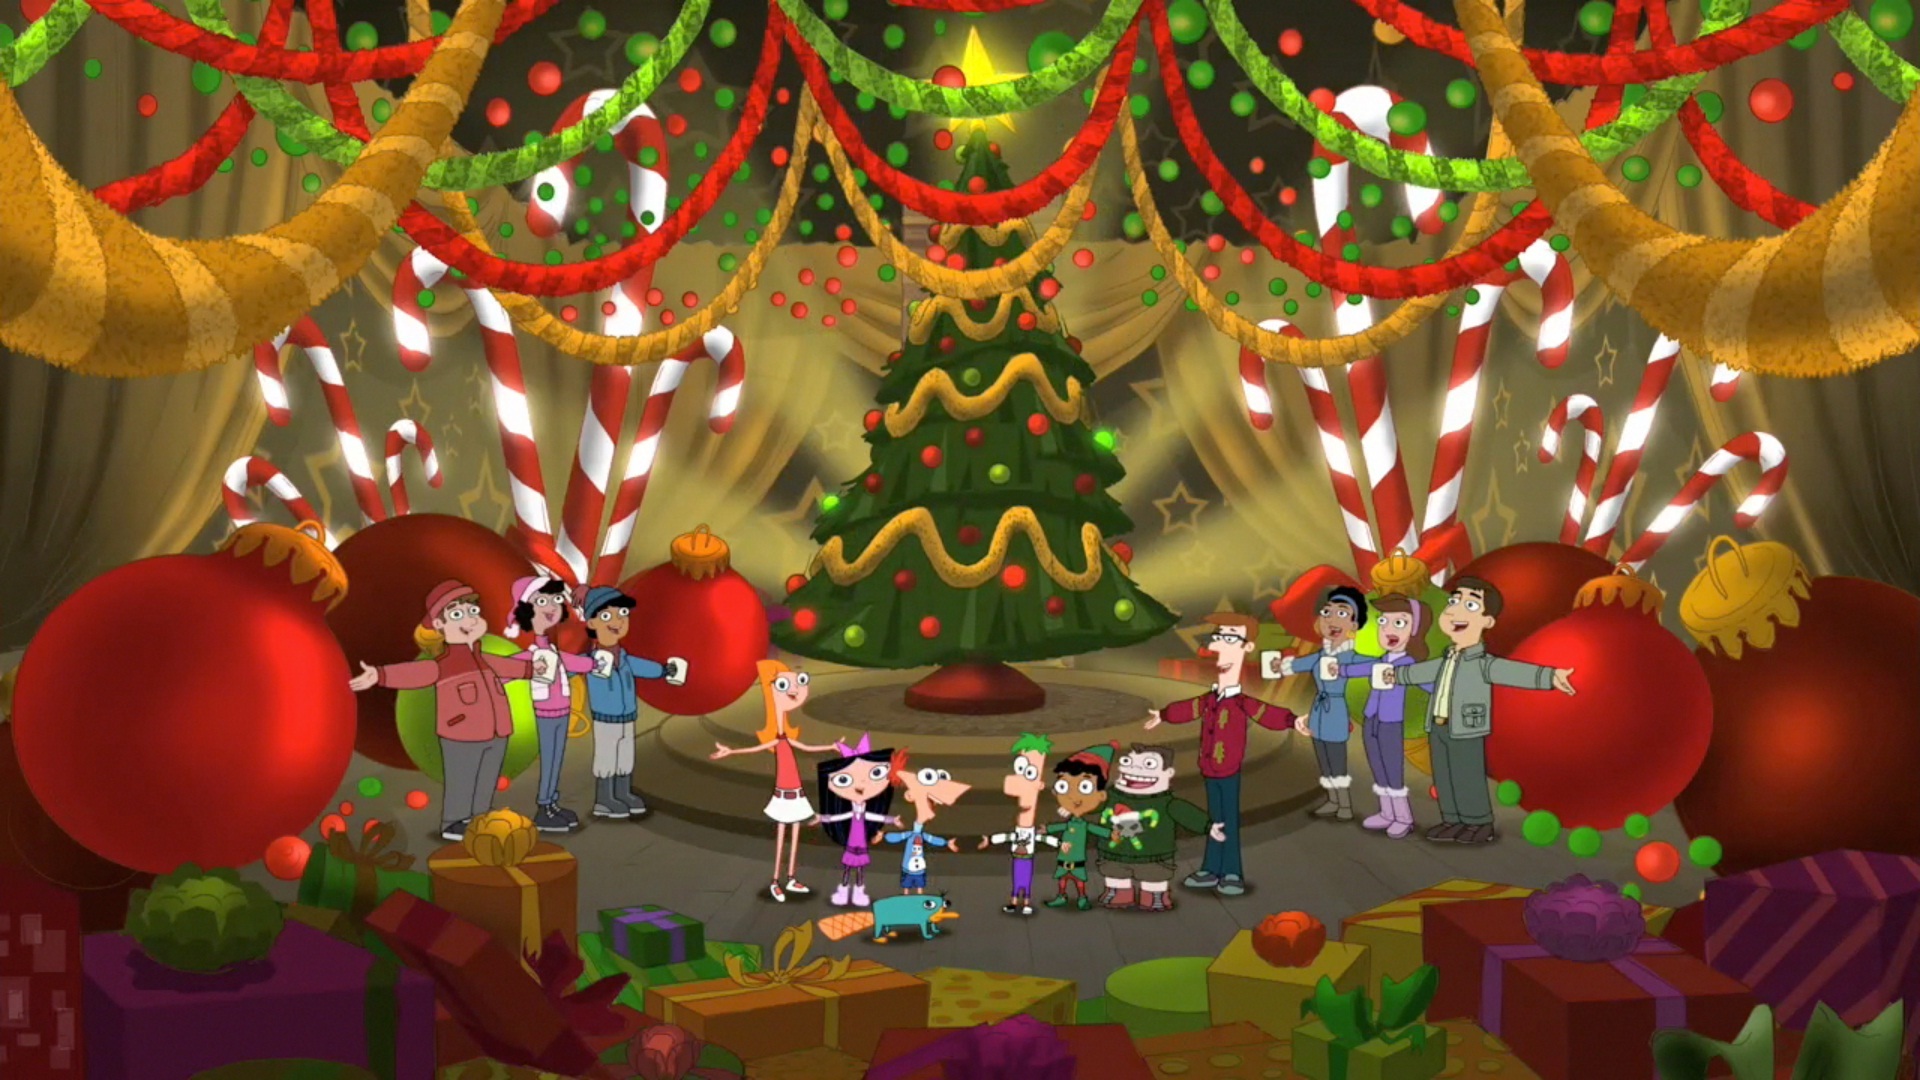 Phineas and Ferb Christmas Wallpaper